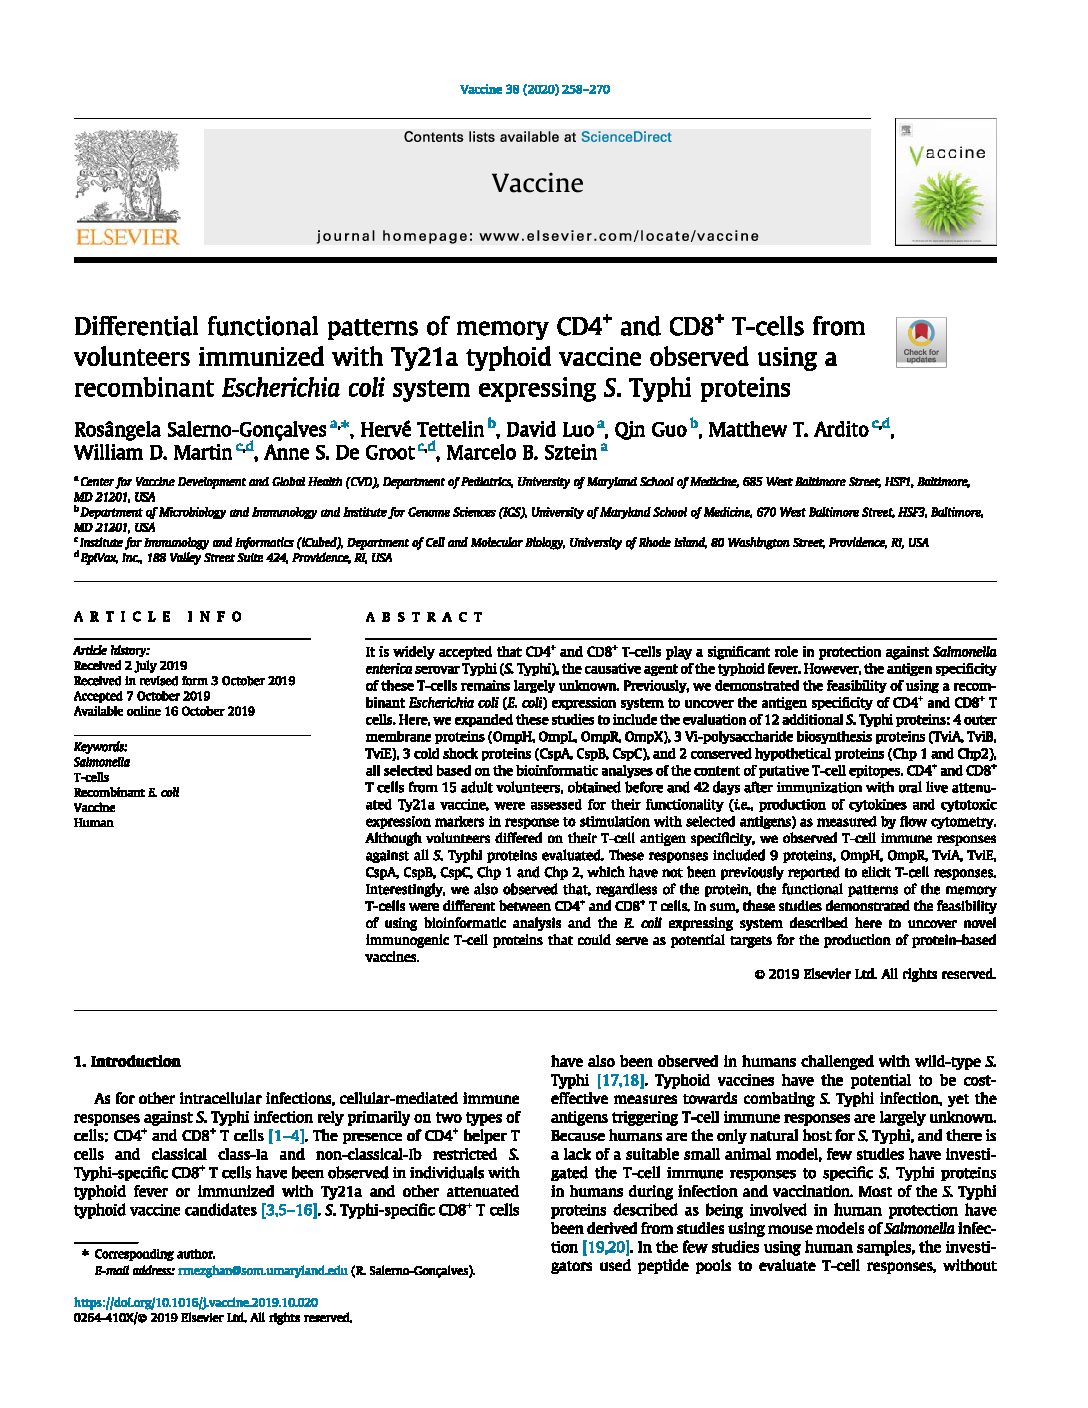 Differential functional patterns of memory CD4+ and CD8+ T-cells from volunteers immunized with Ty21a typhoid vaccine observed using a recombinant Escherichia coli system expressing S. Typhi proteins